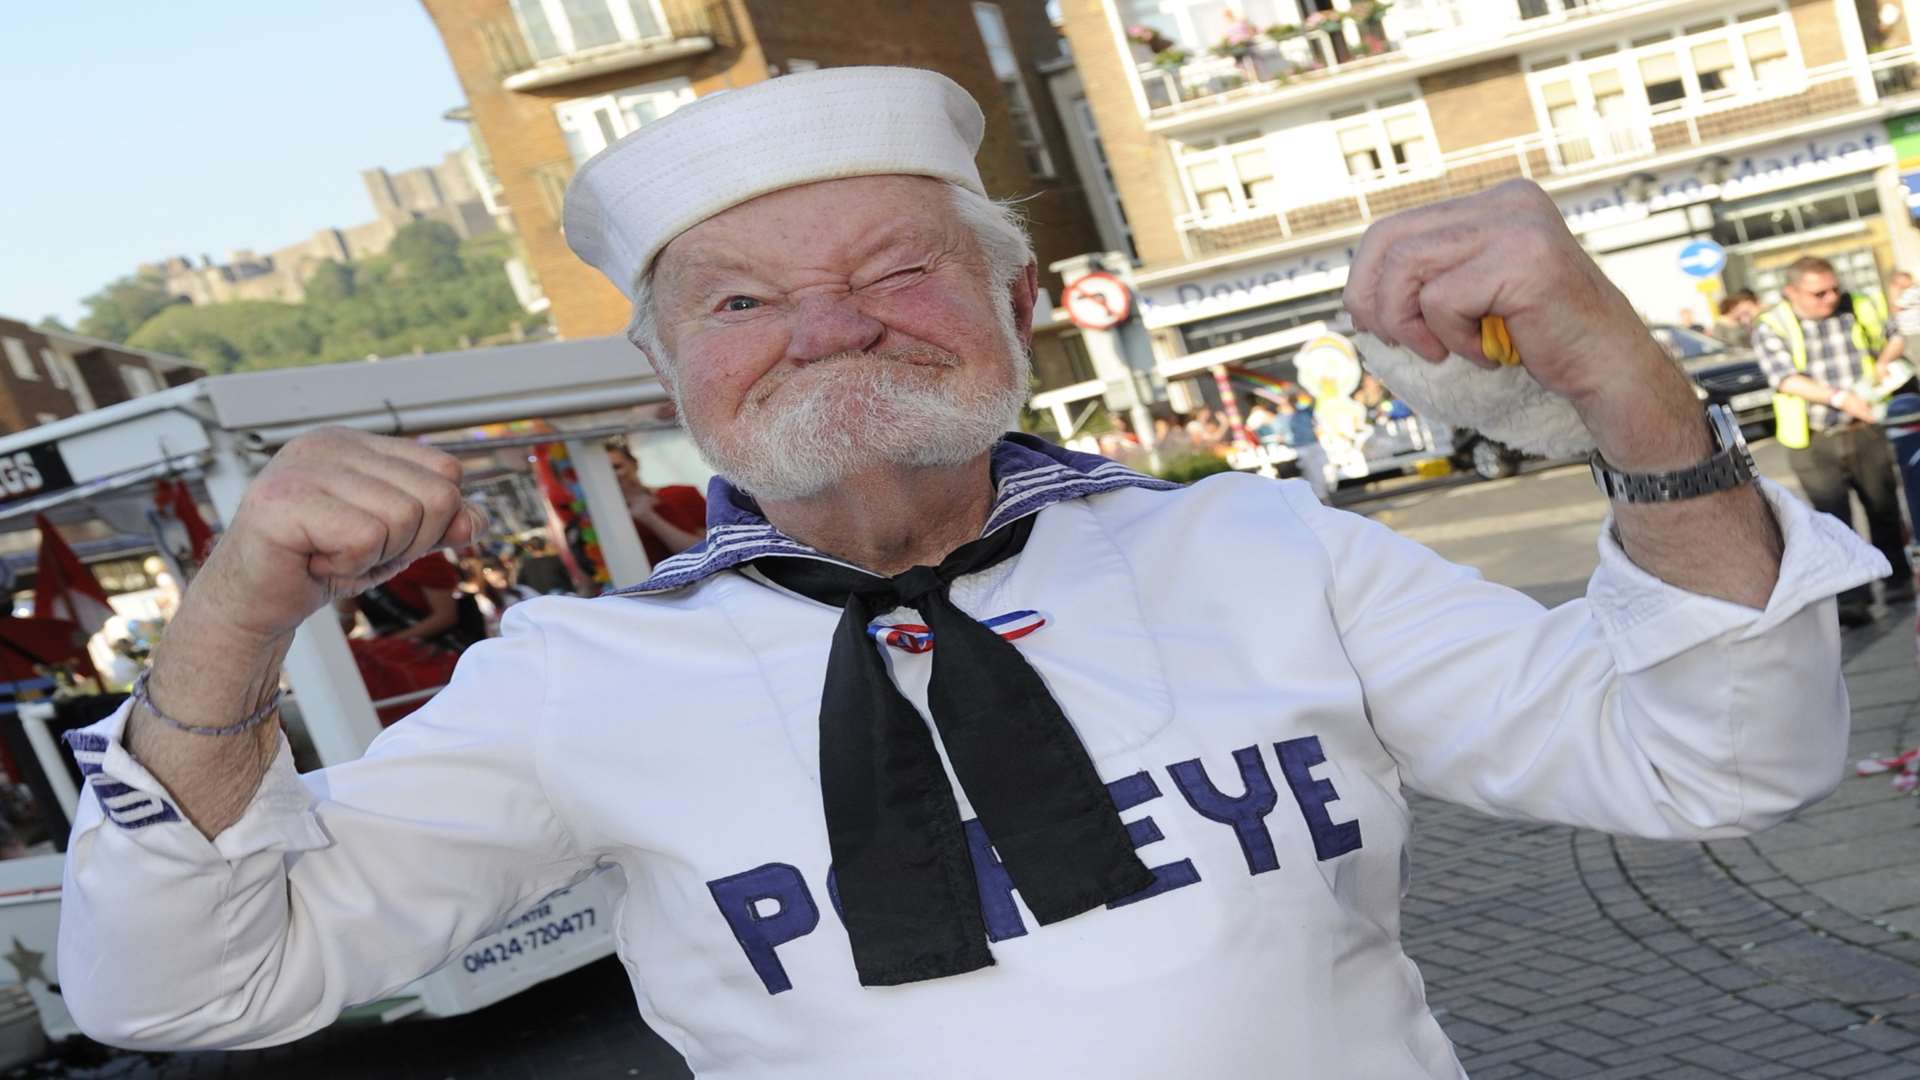 Ron Everett, the ever-popular Popeye died on Tuesday